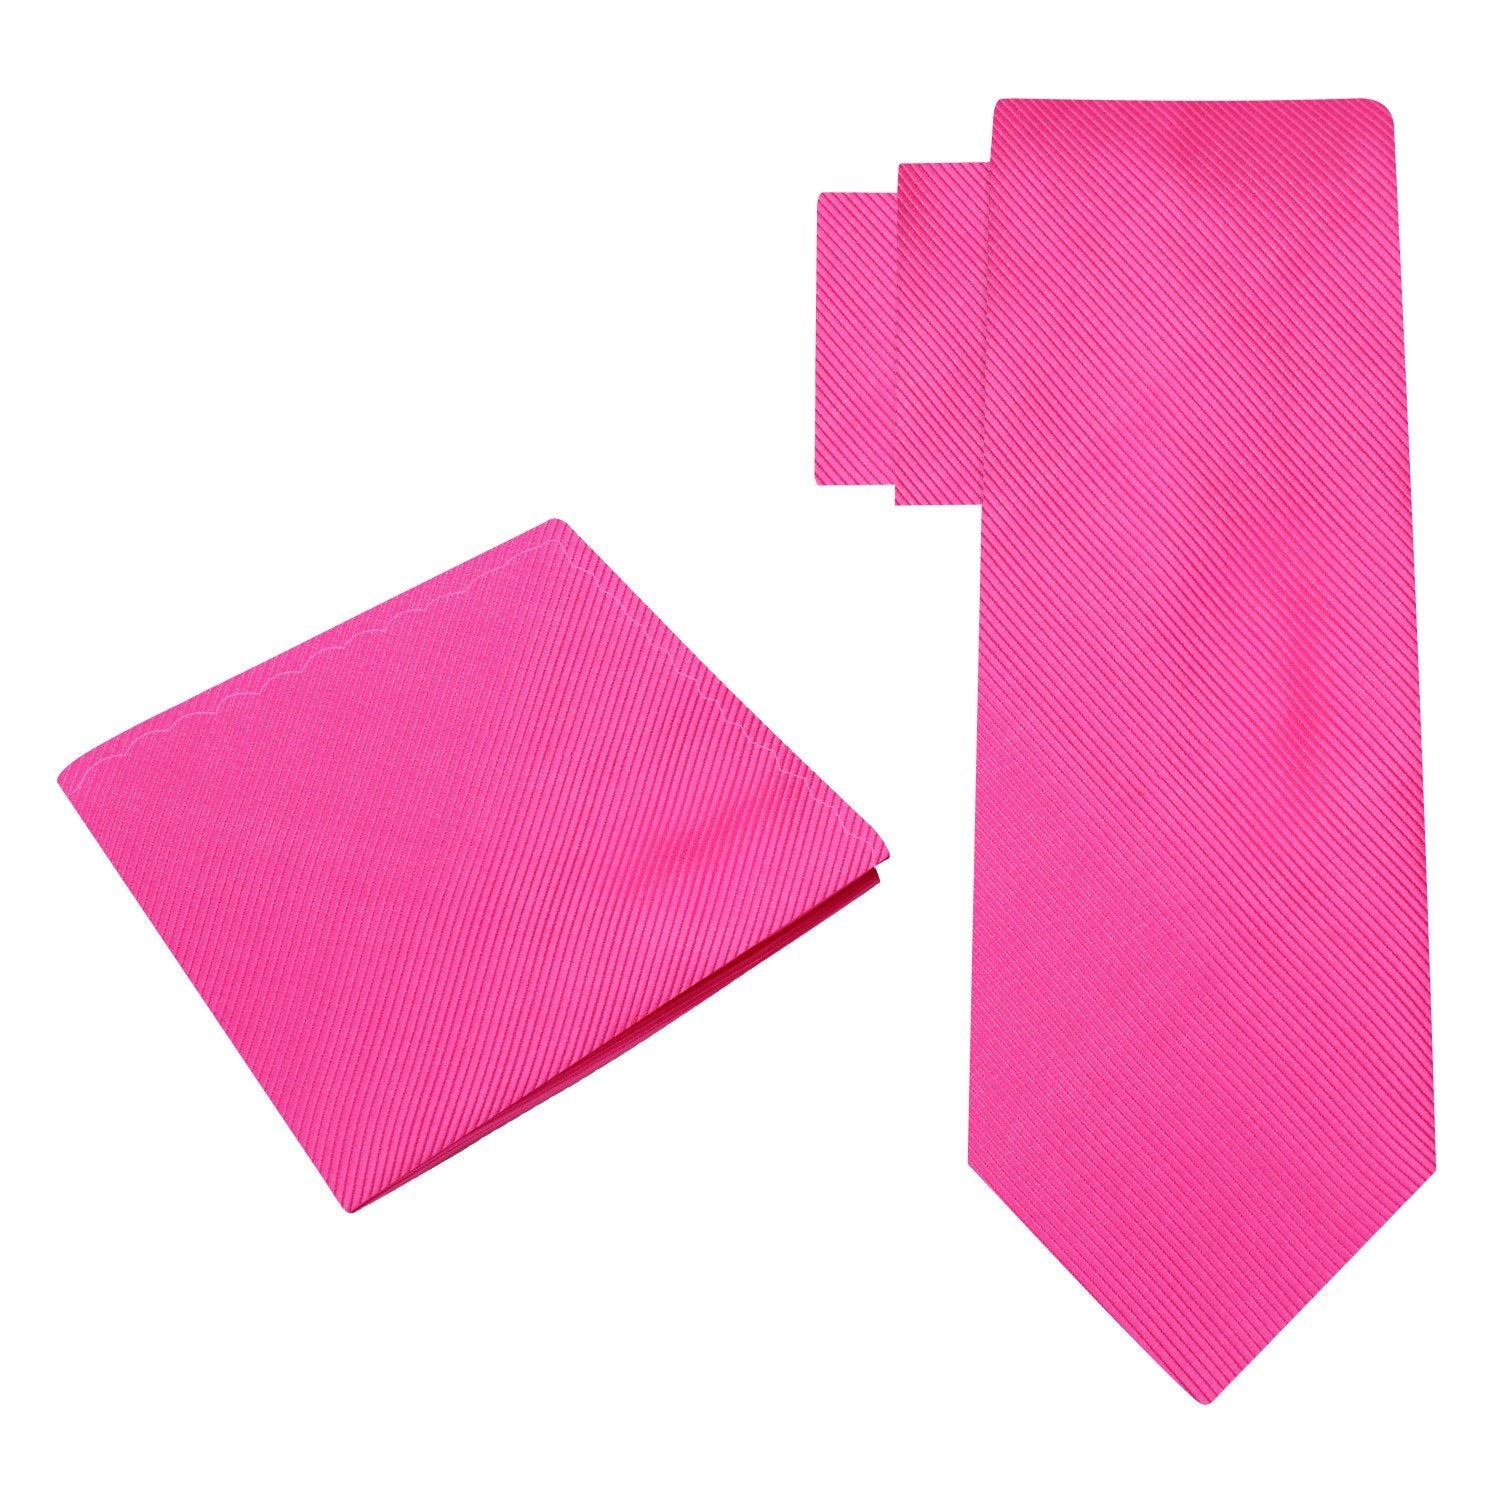 Alt View: Bright Pink Tie and Square